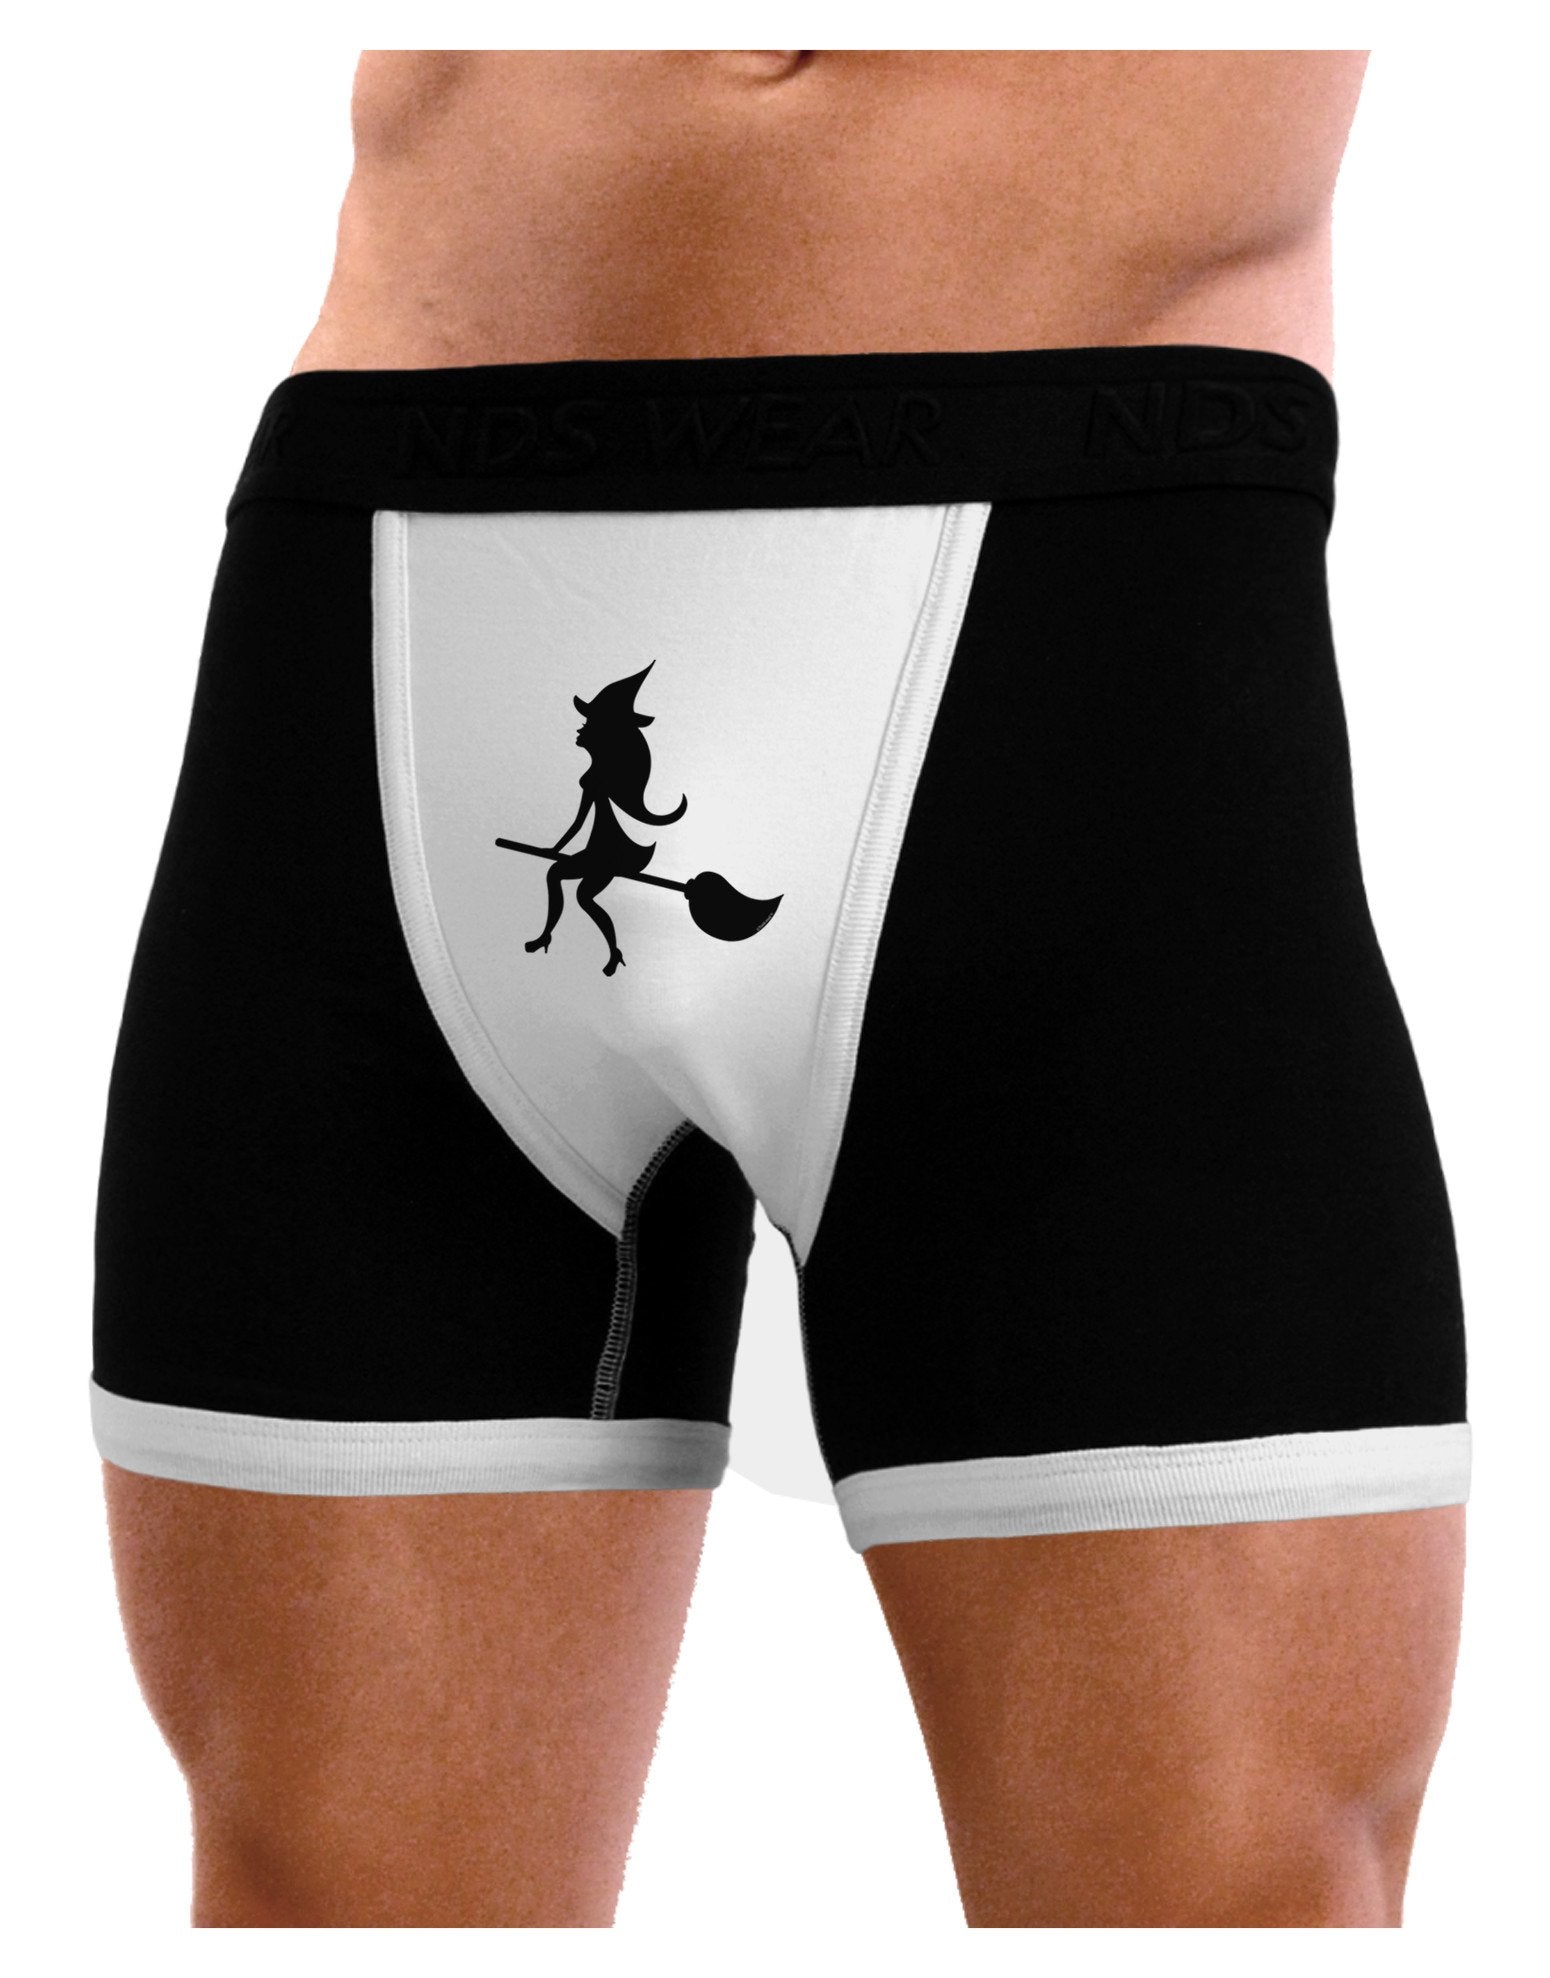 How Do You Shop Underwear for Halloween?